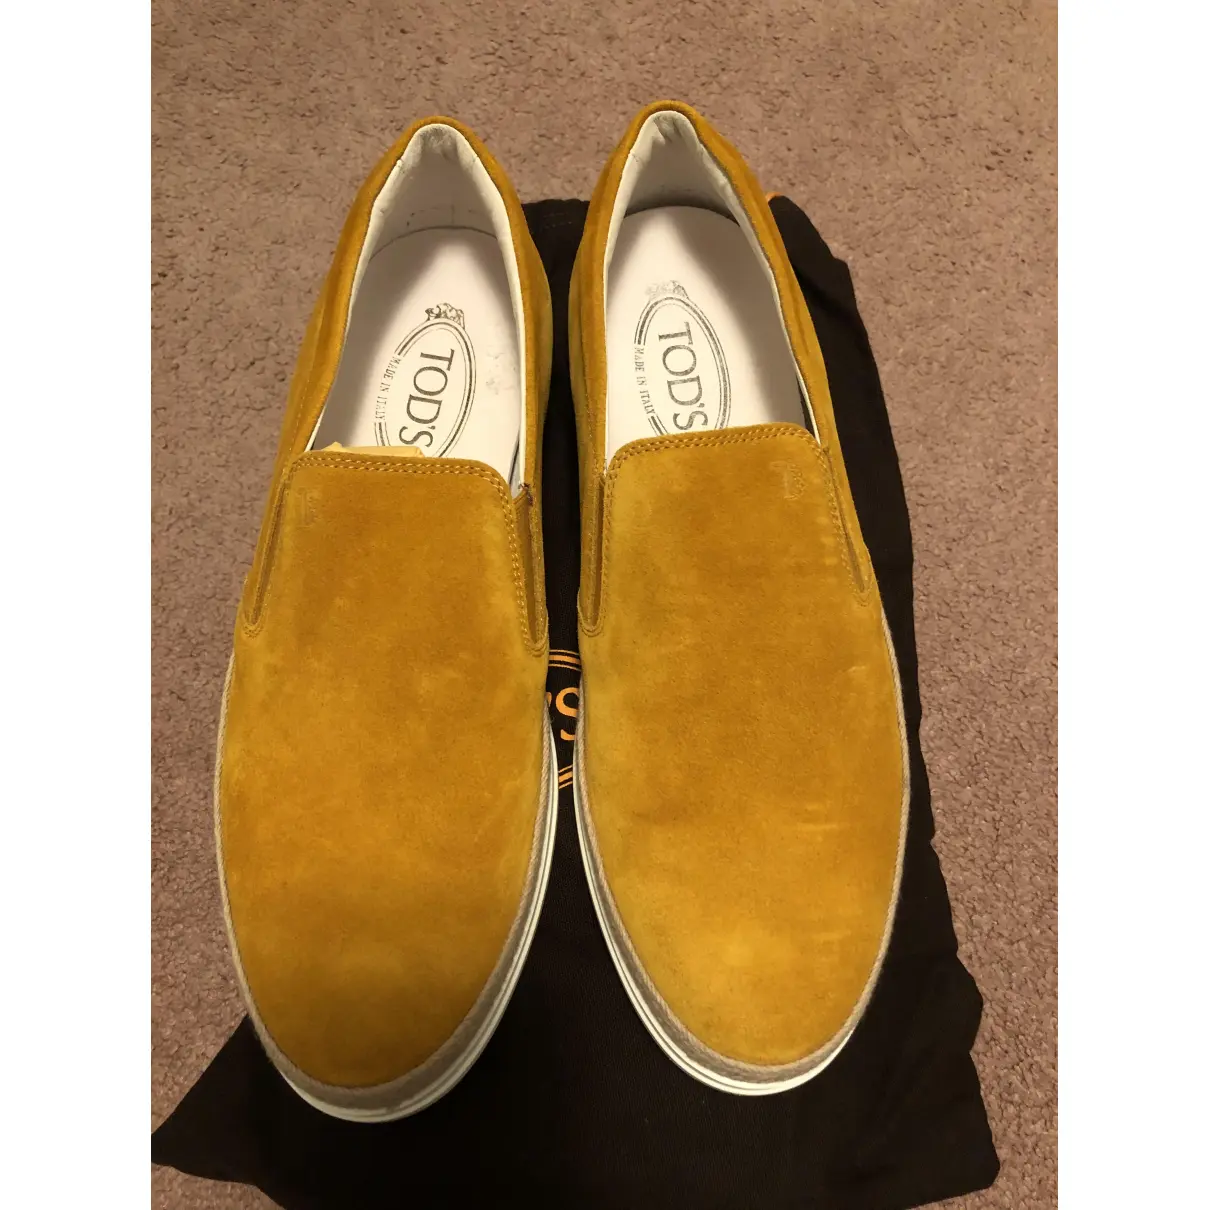 Buy Tod's Leather espadrilles online